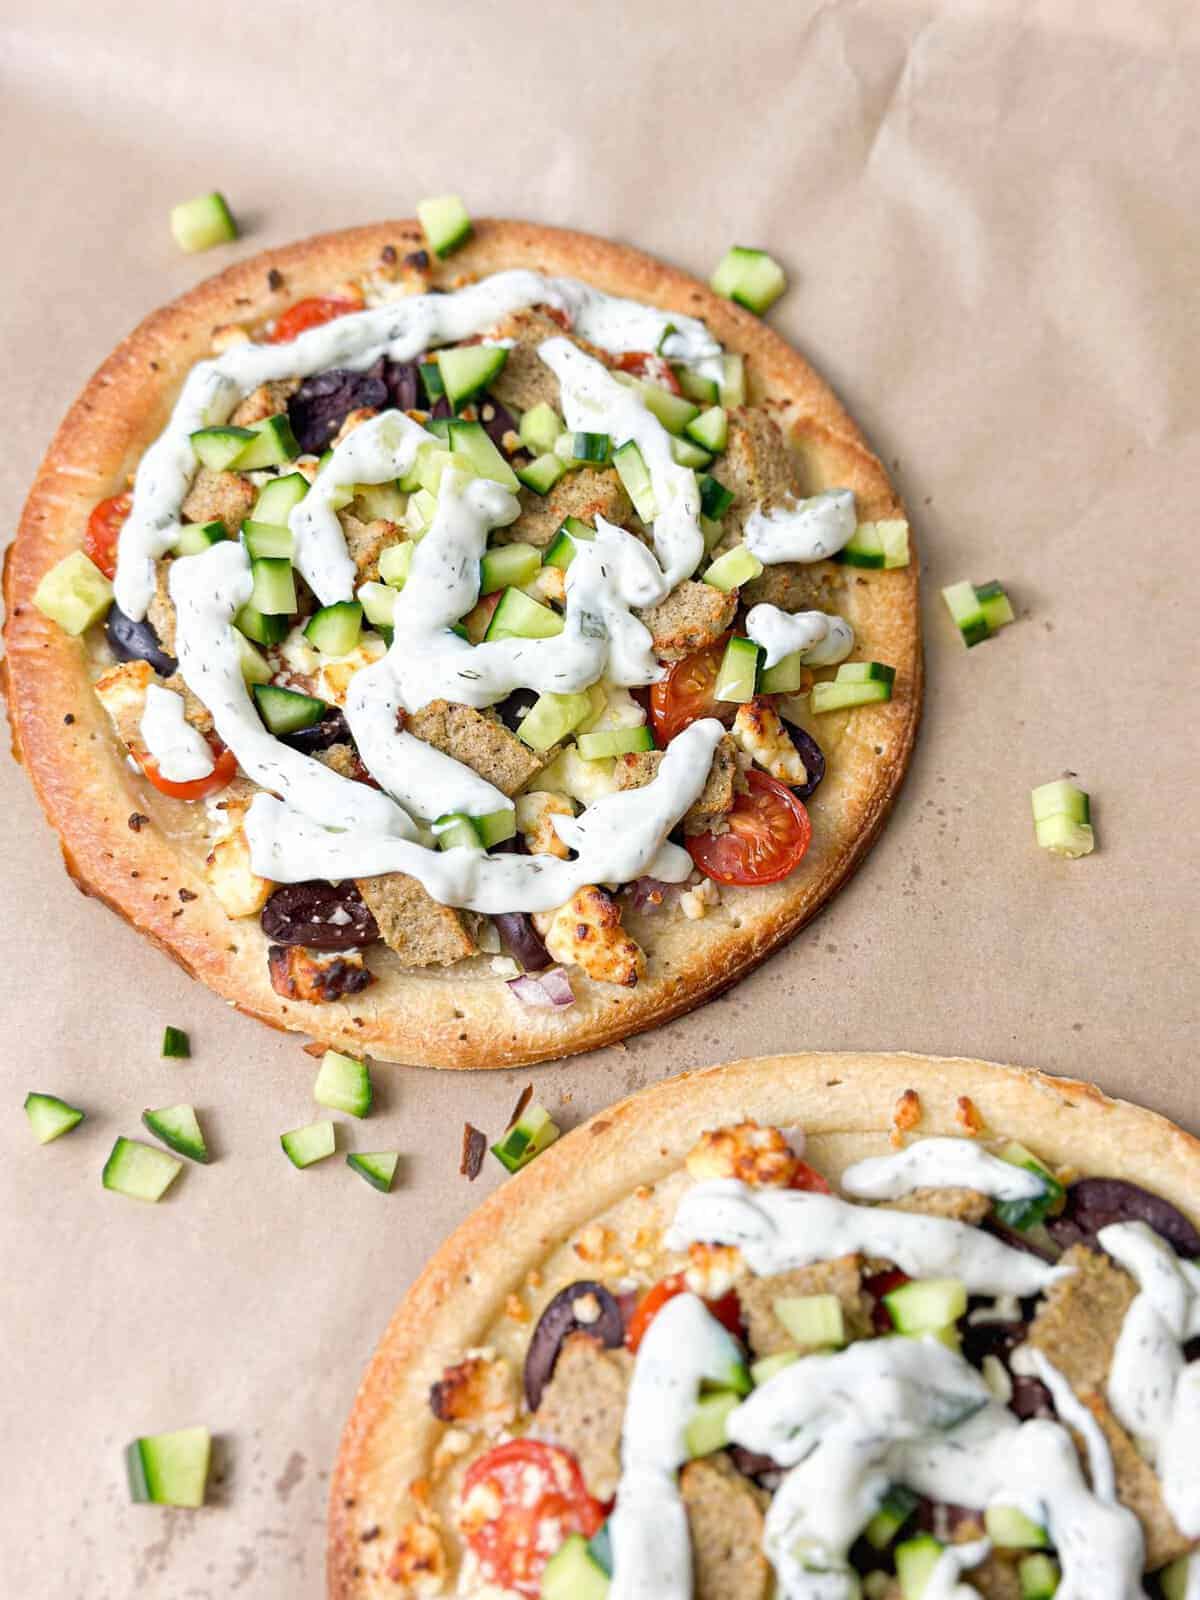 Gyro Mediterranean flatbread pizza created from scratch with cherry tomatoes, olives, feta, gyro meat, and more.